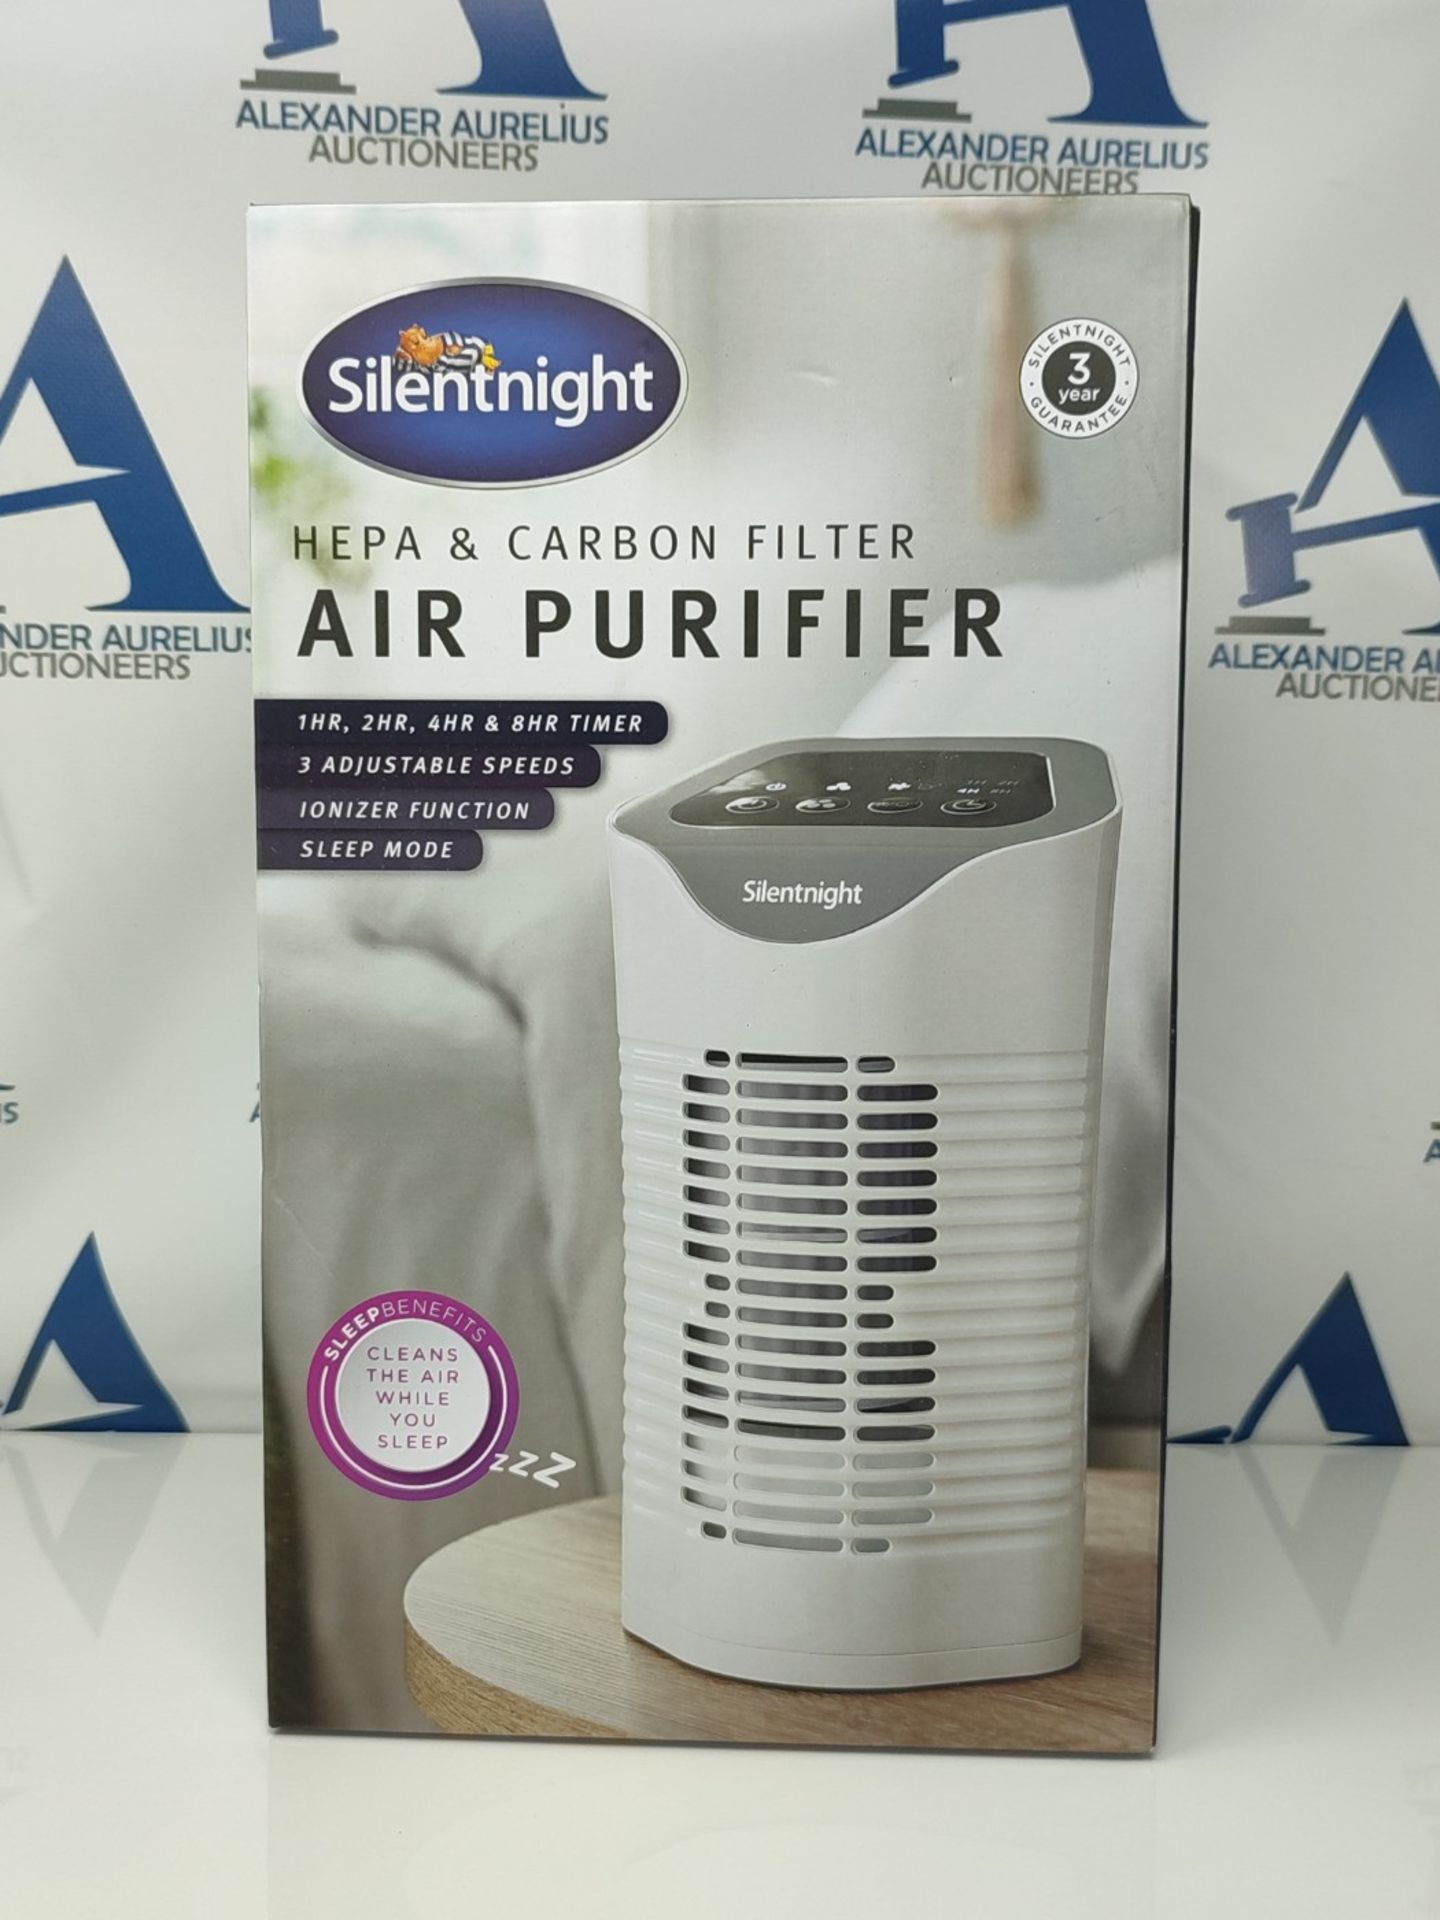 Silentnight Air Purifier with HEPA & Carbon Filters, Air Cleaner for Allergies, Pollen - Image 2 of 3